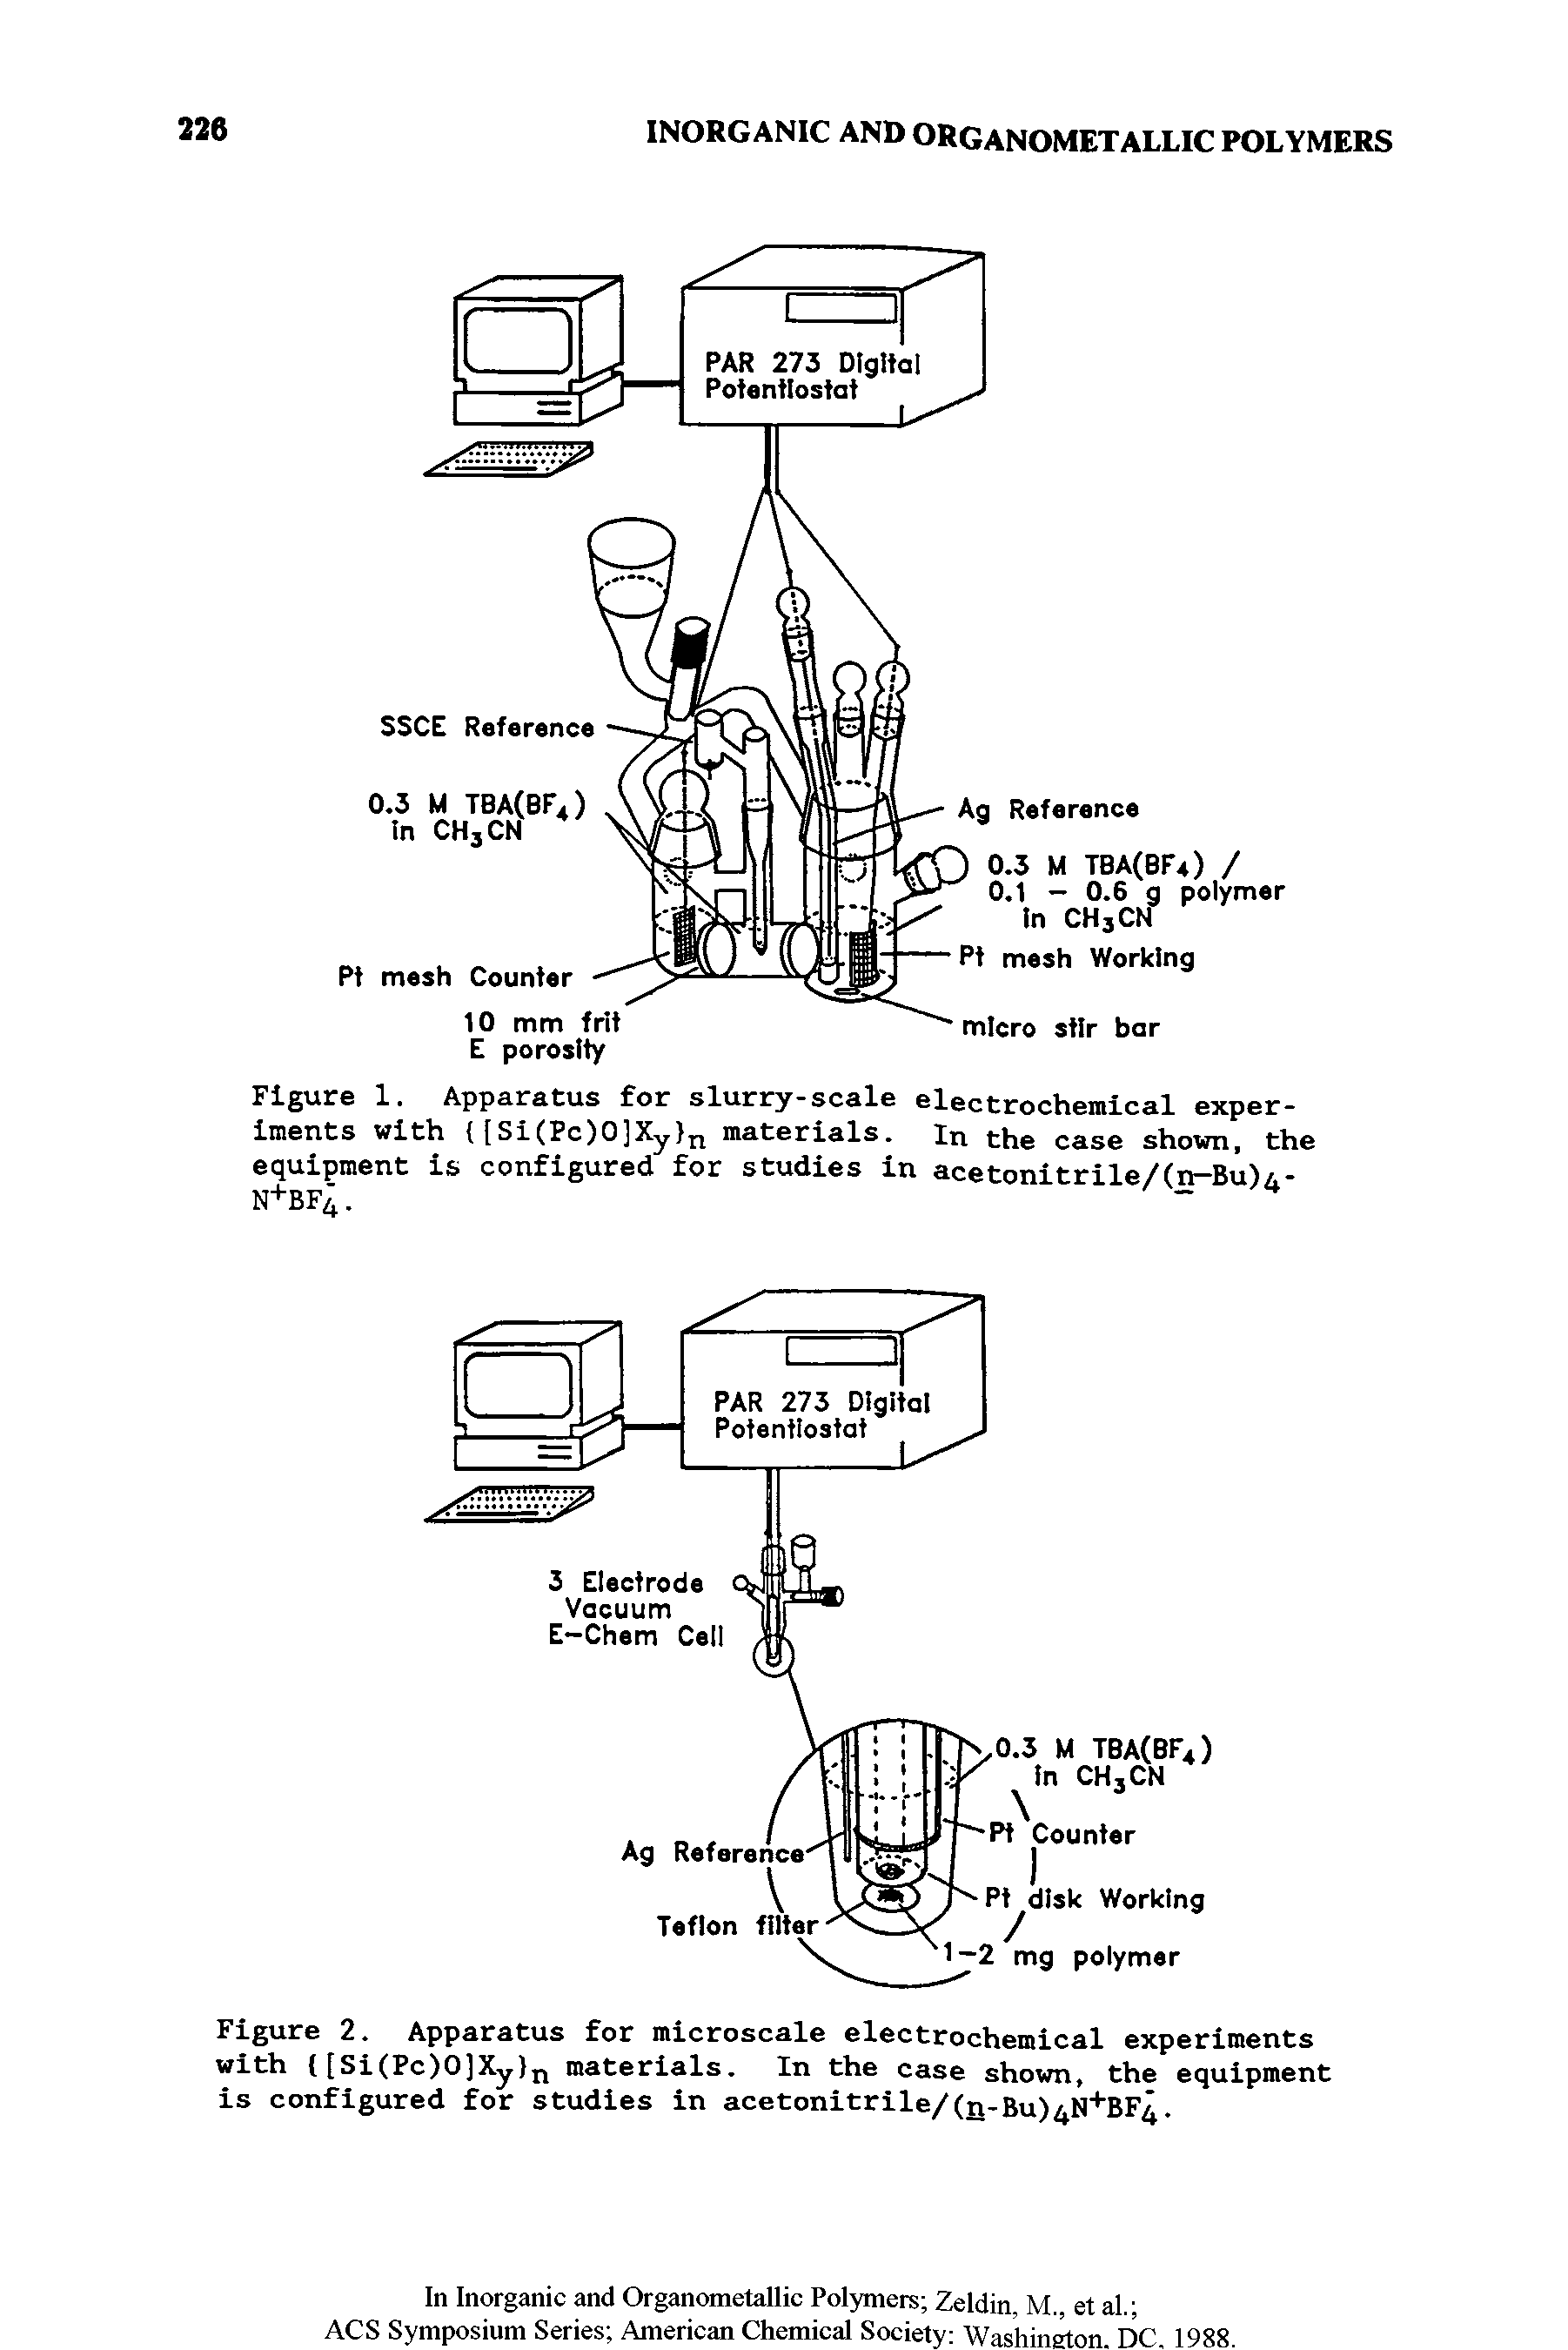 Figure 1. Apparatus for slurry-scale electrochemical experiments with [Si(Pc)0]Xy n materials. ln the case shown, the equipment is configured for studies in acetonitrile/(n-Bu)4-N+BF4.